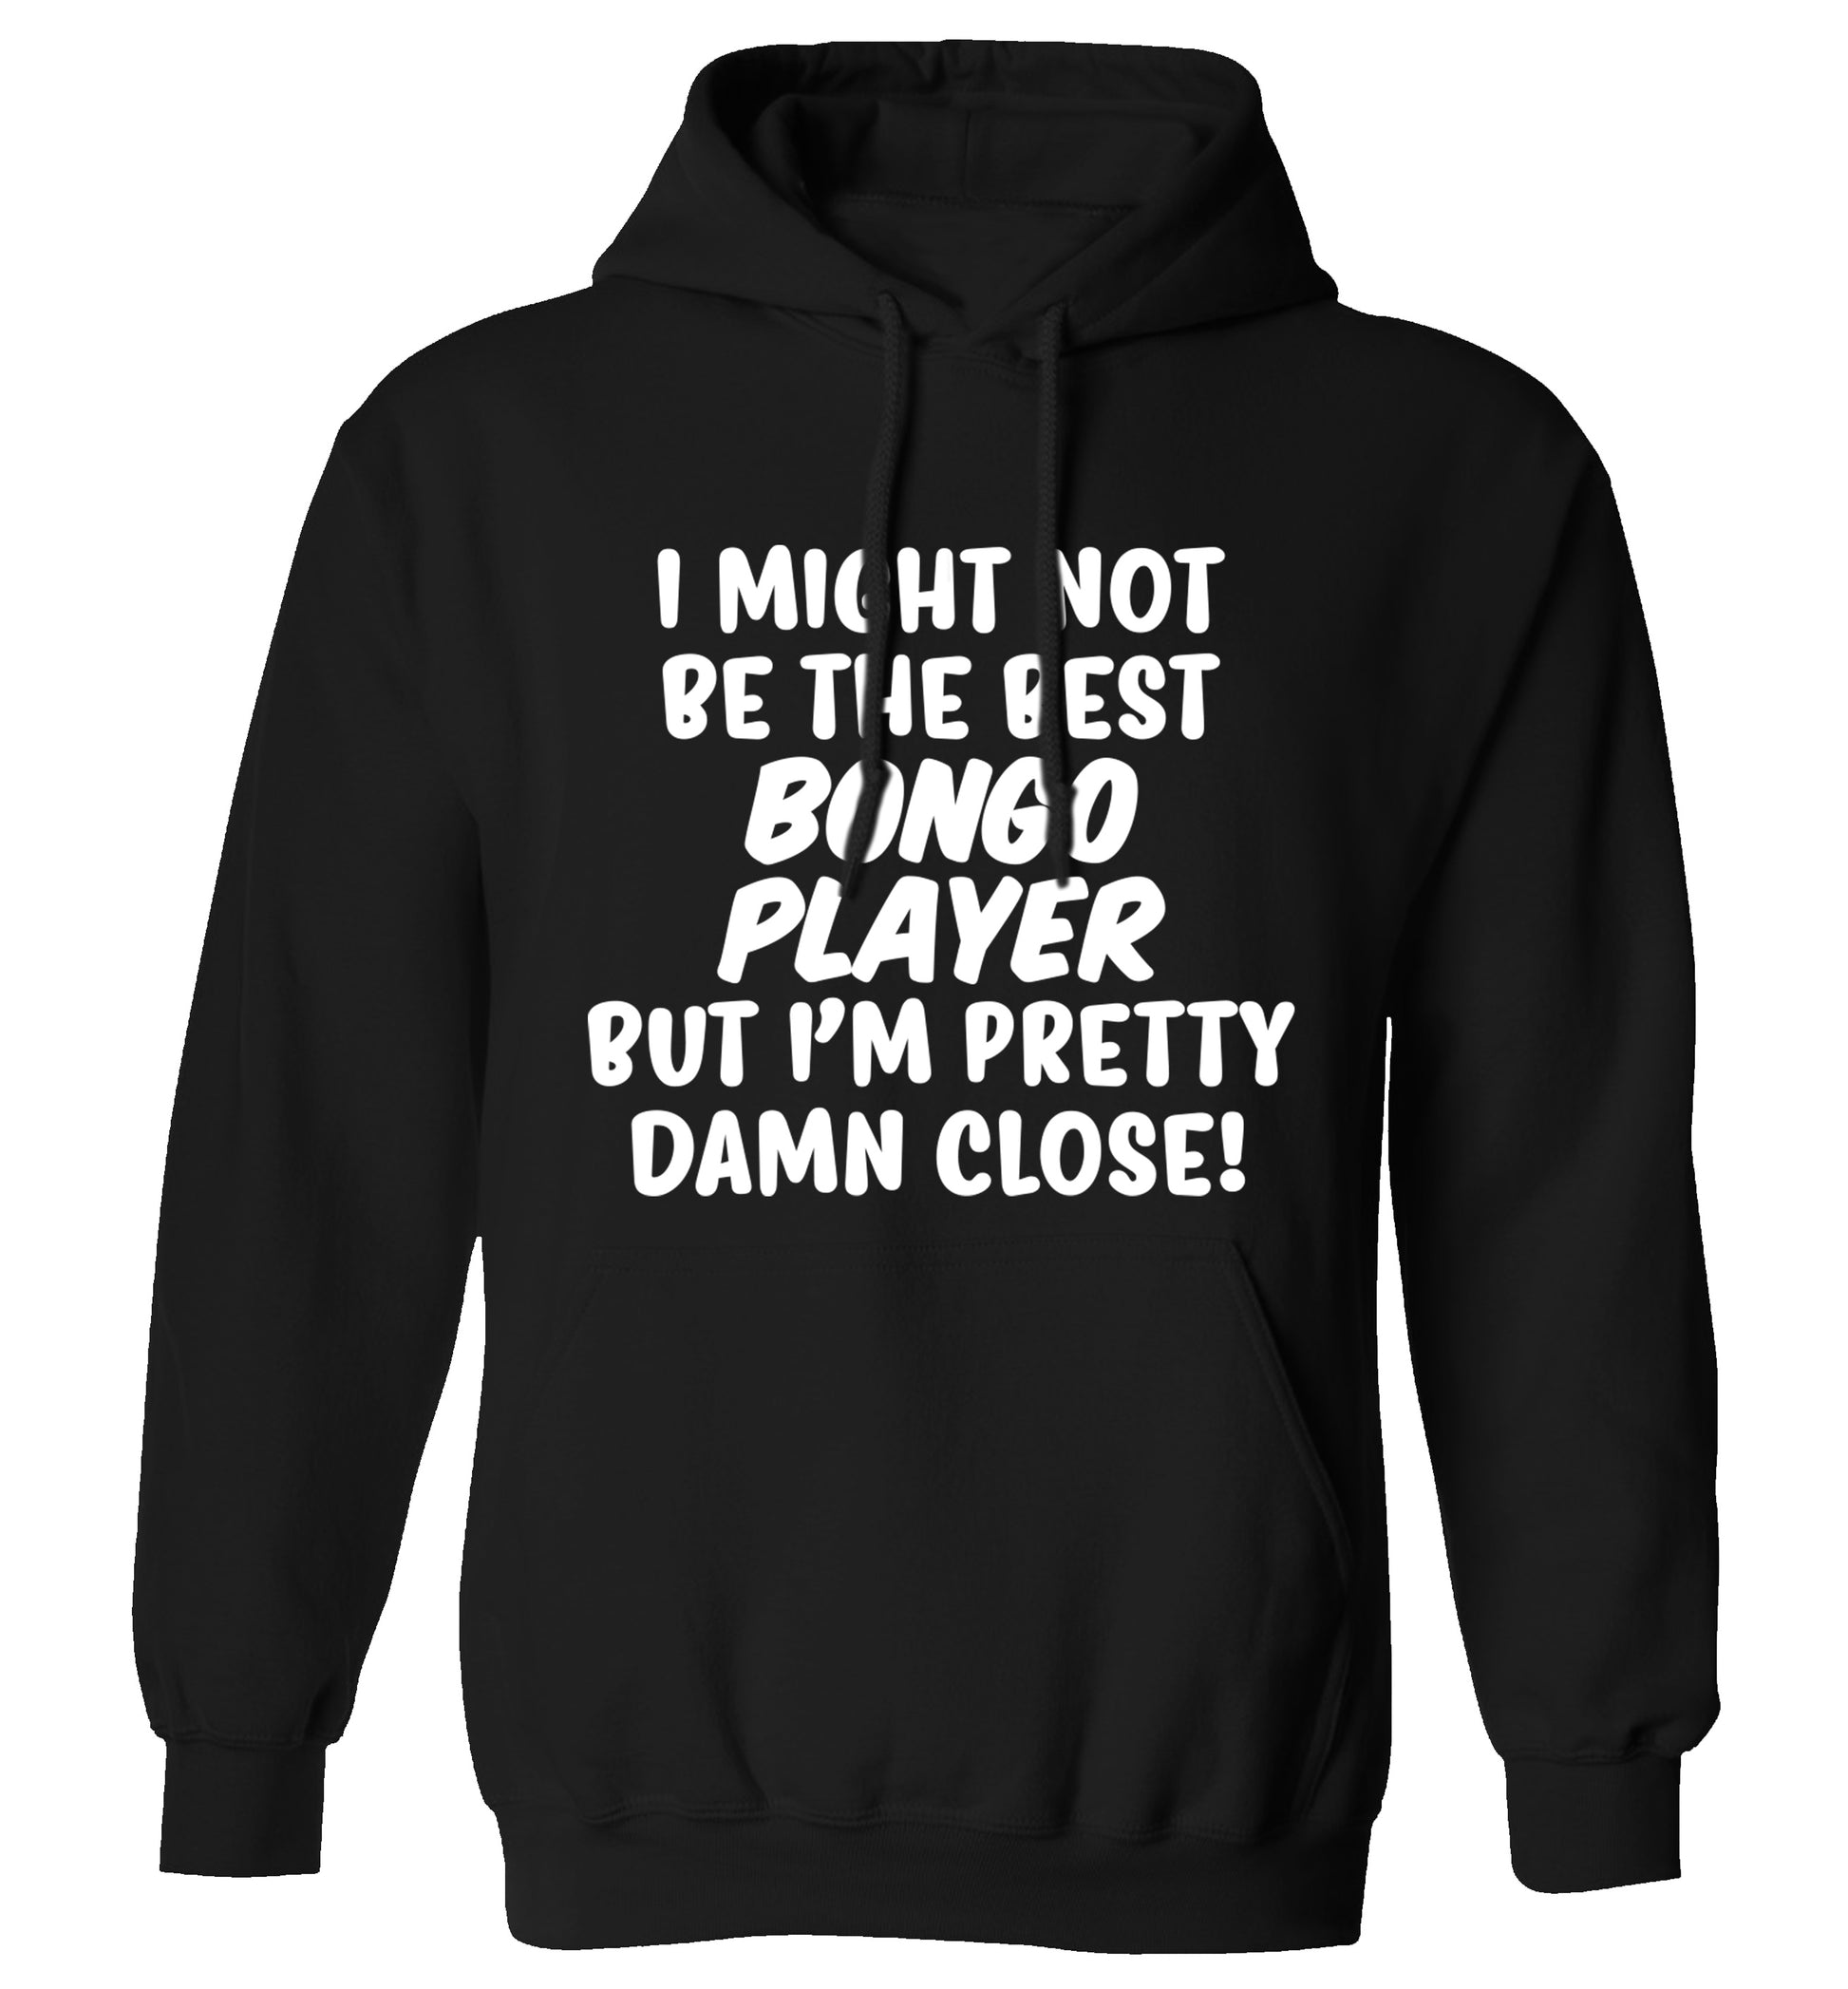 I might not be the best bongo player but I'm pretty close! adults unisexblack hoodie 2XL